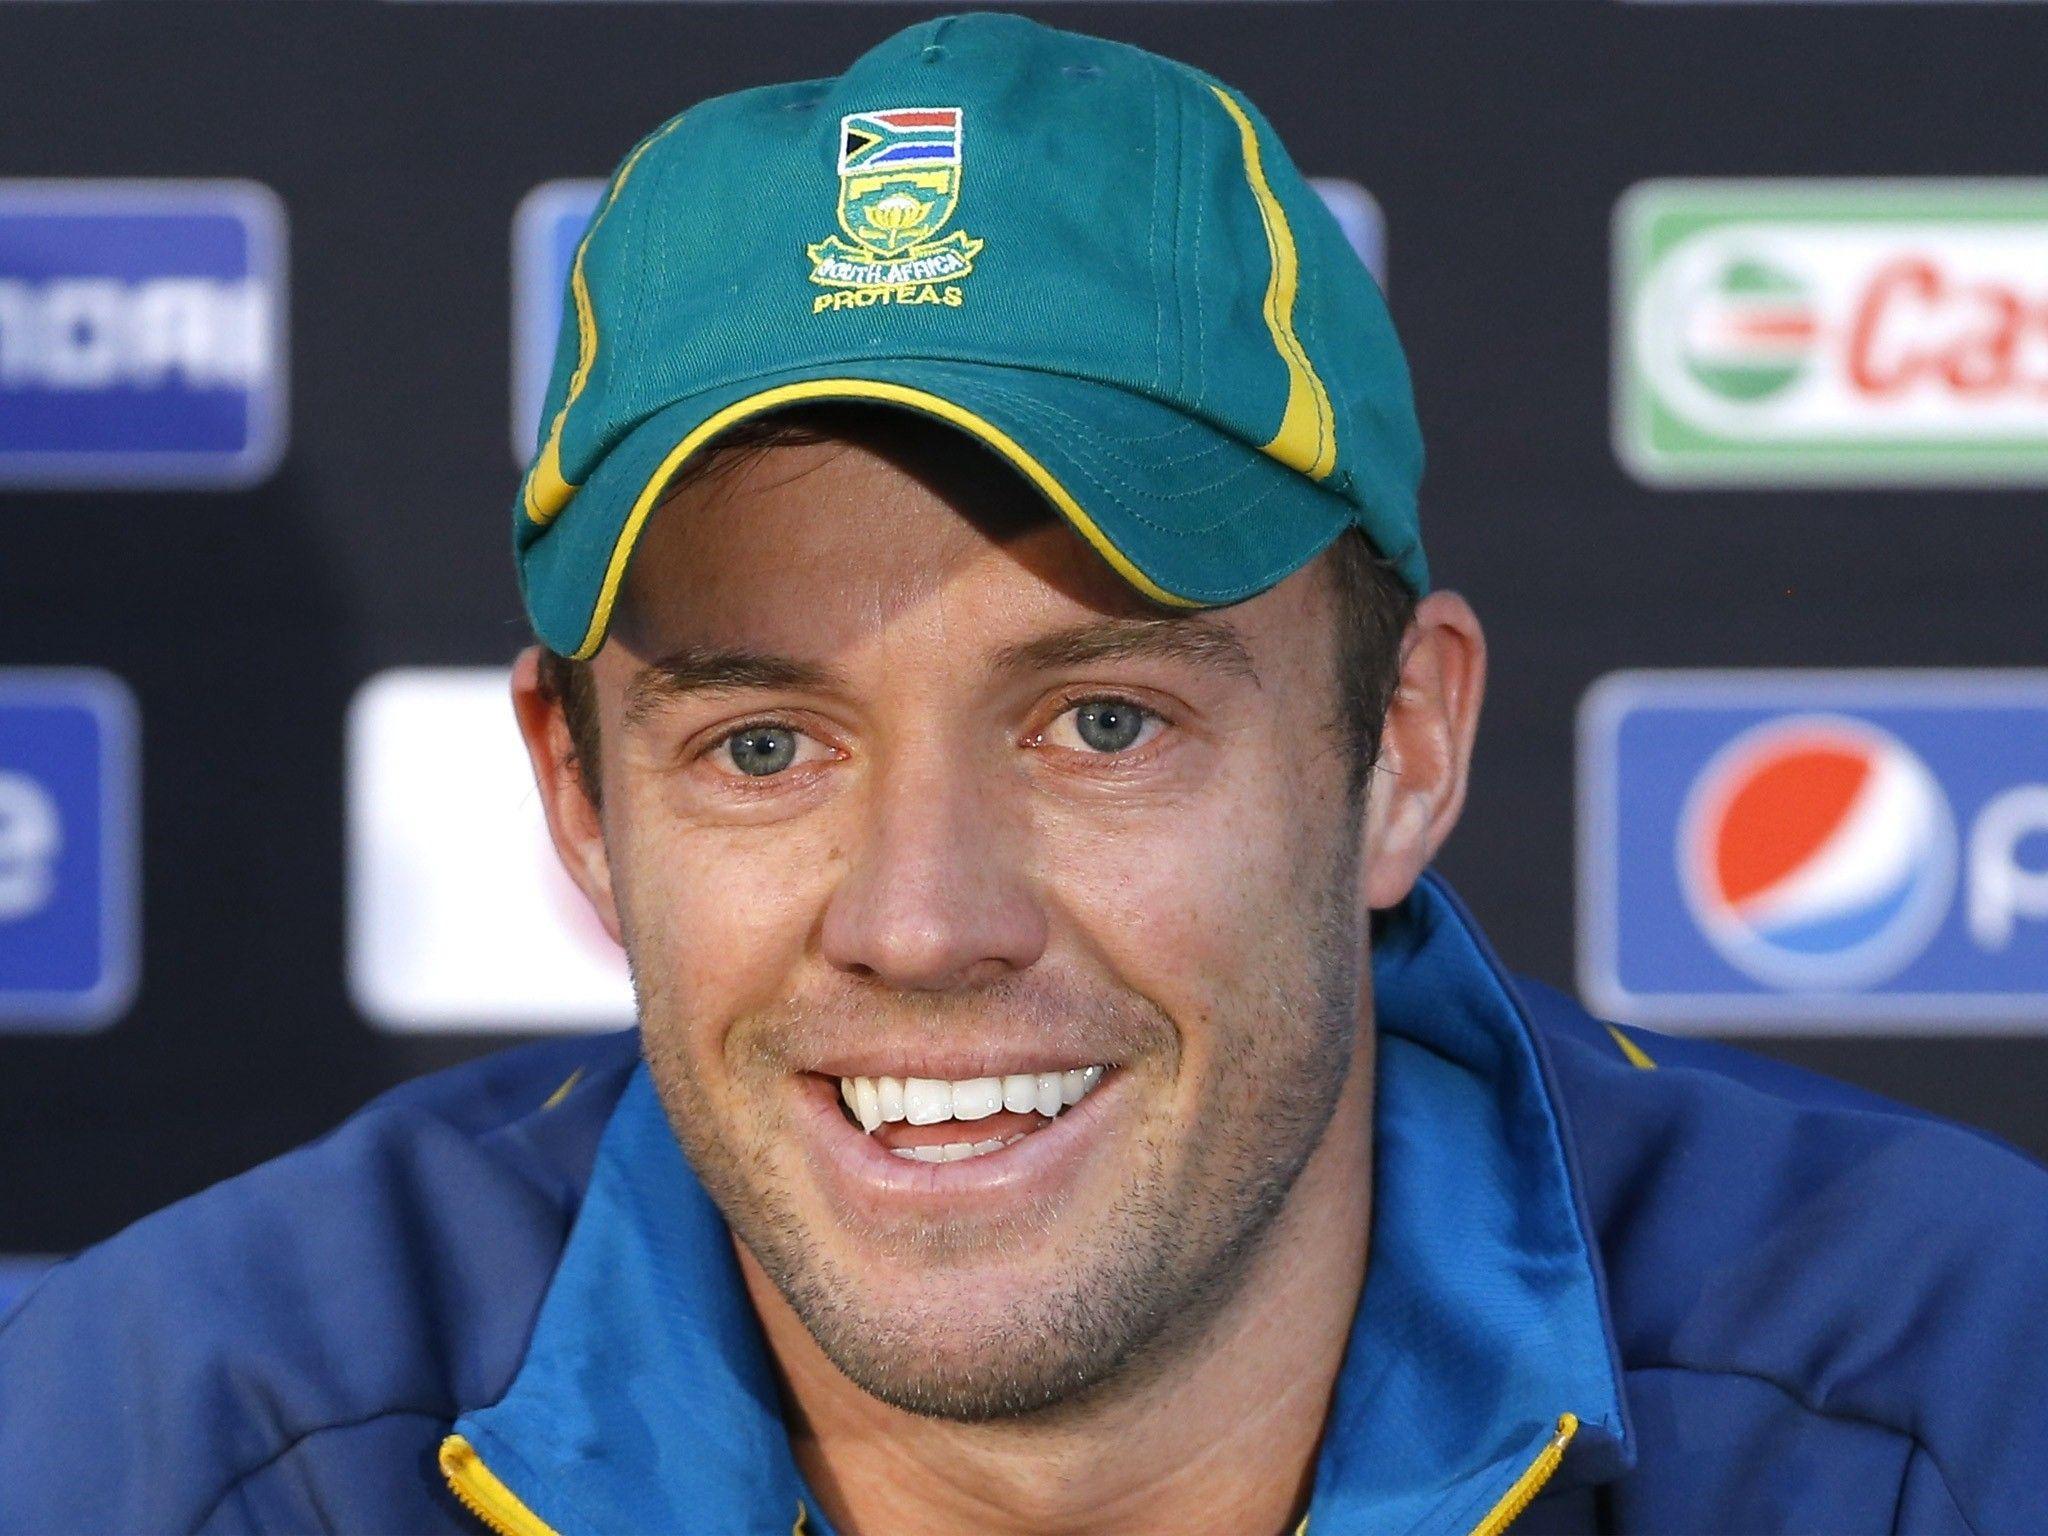 Famous South African Cricket Player AB de Villiers in Worldcup